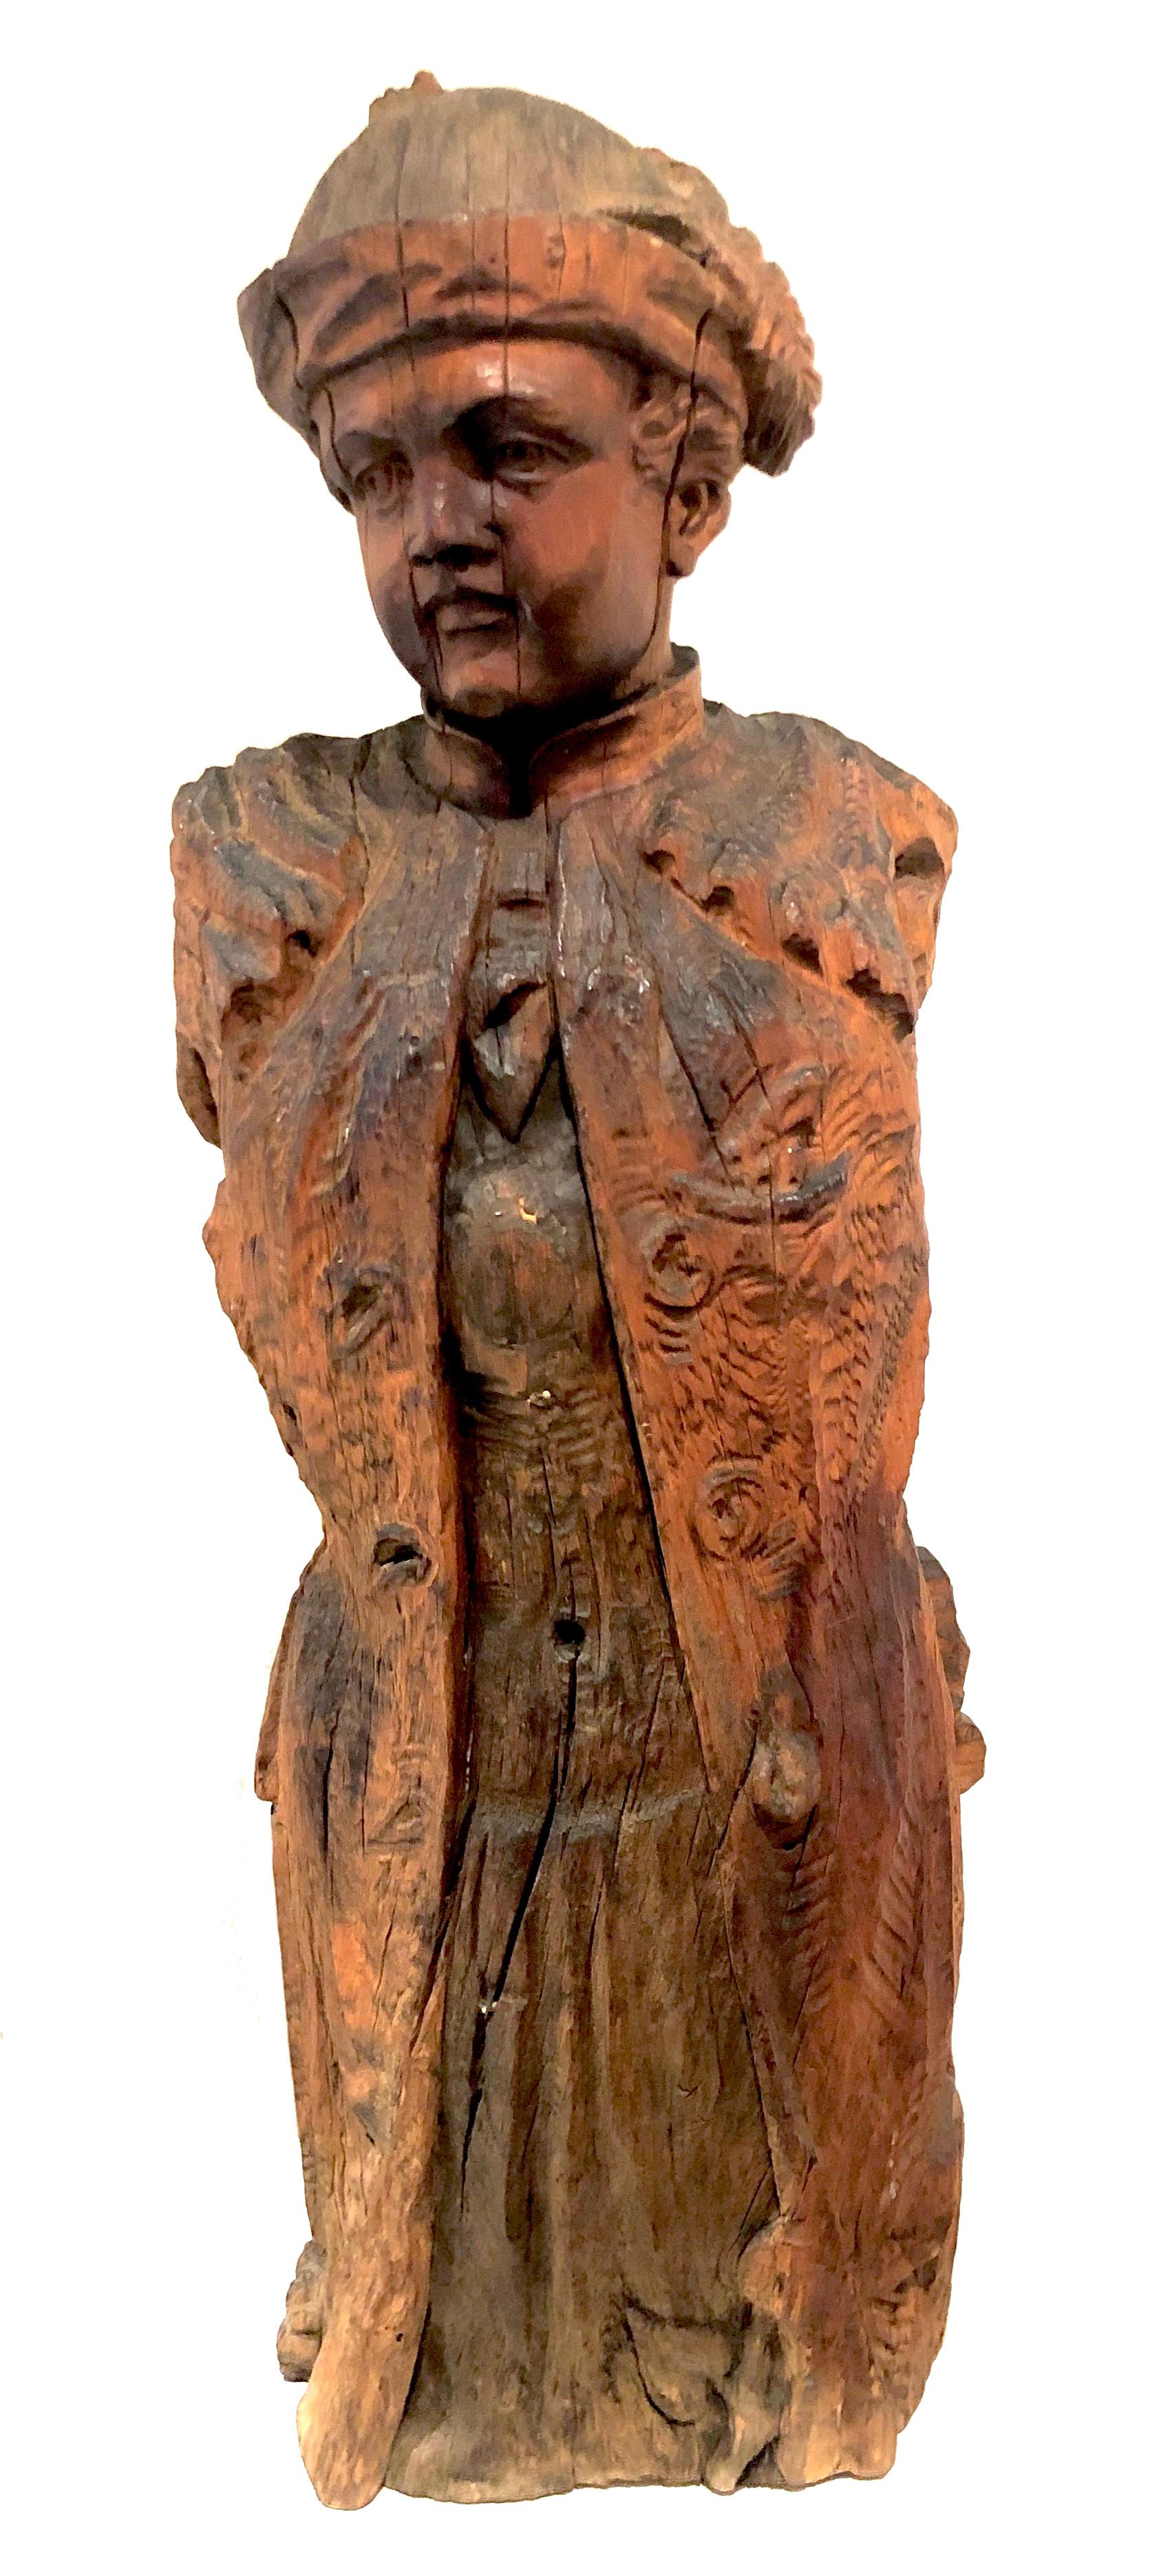 Beautiful carving of a young noble man dressed in a frock coat with a waistcoat and wearing a hat with a feather. 
The sculpture is carved out of an unusually large pear tree trunk. 
It was used in a garden as a fountain figure and is therefore